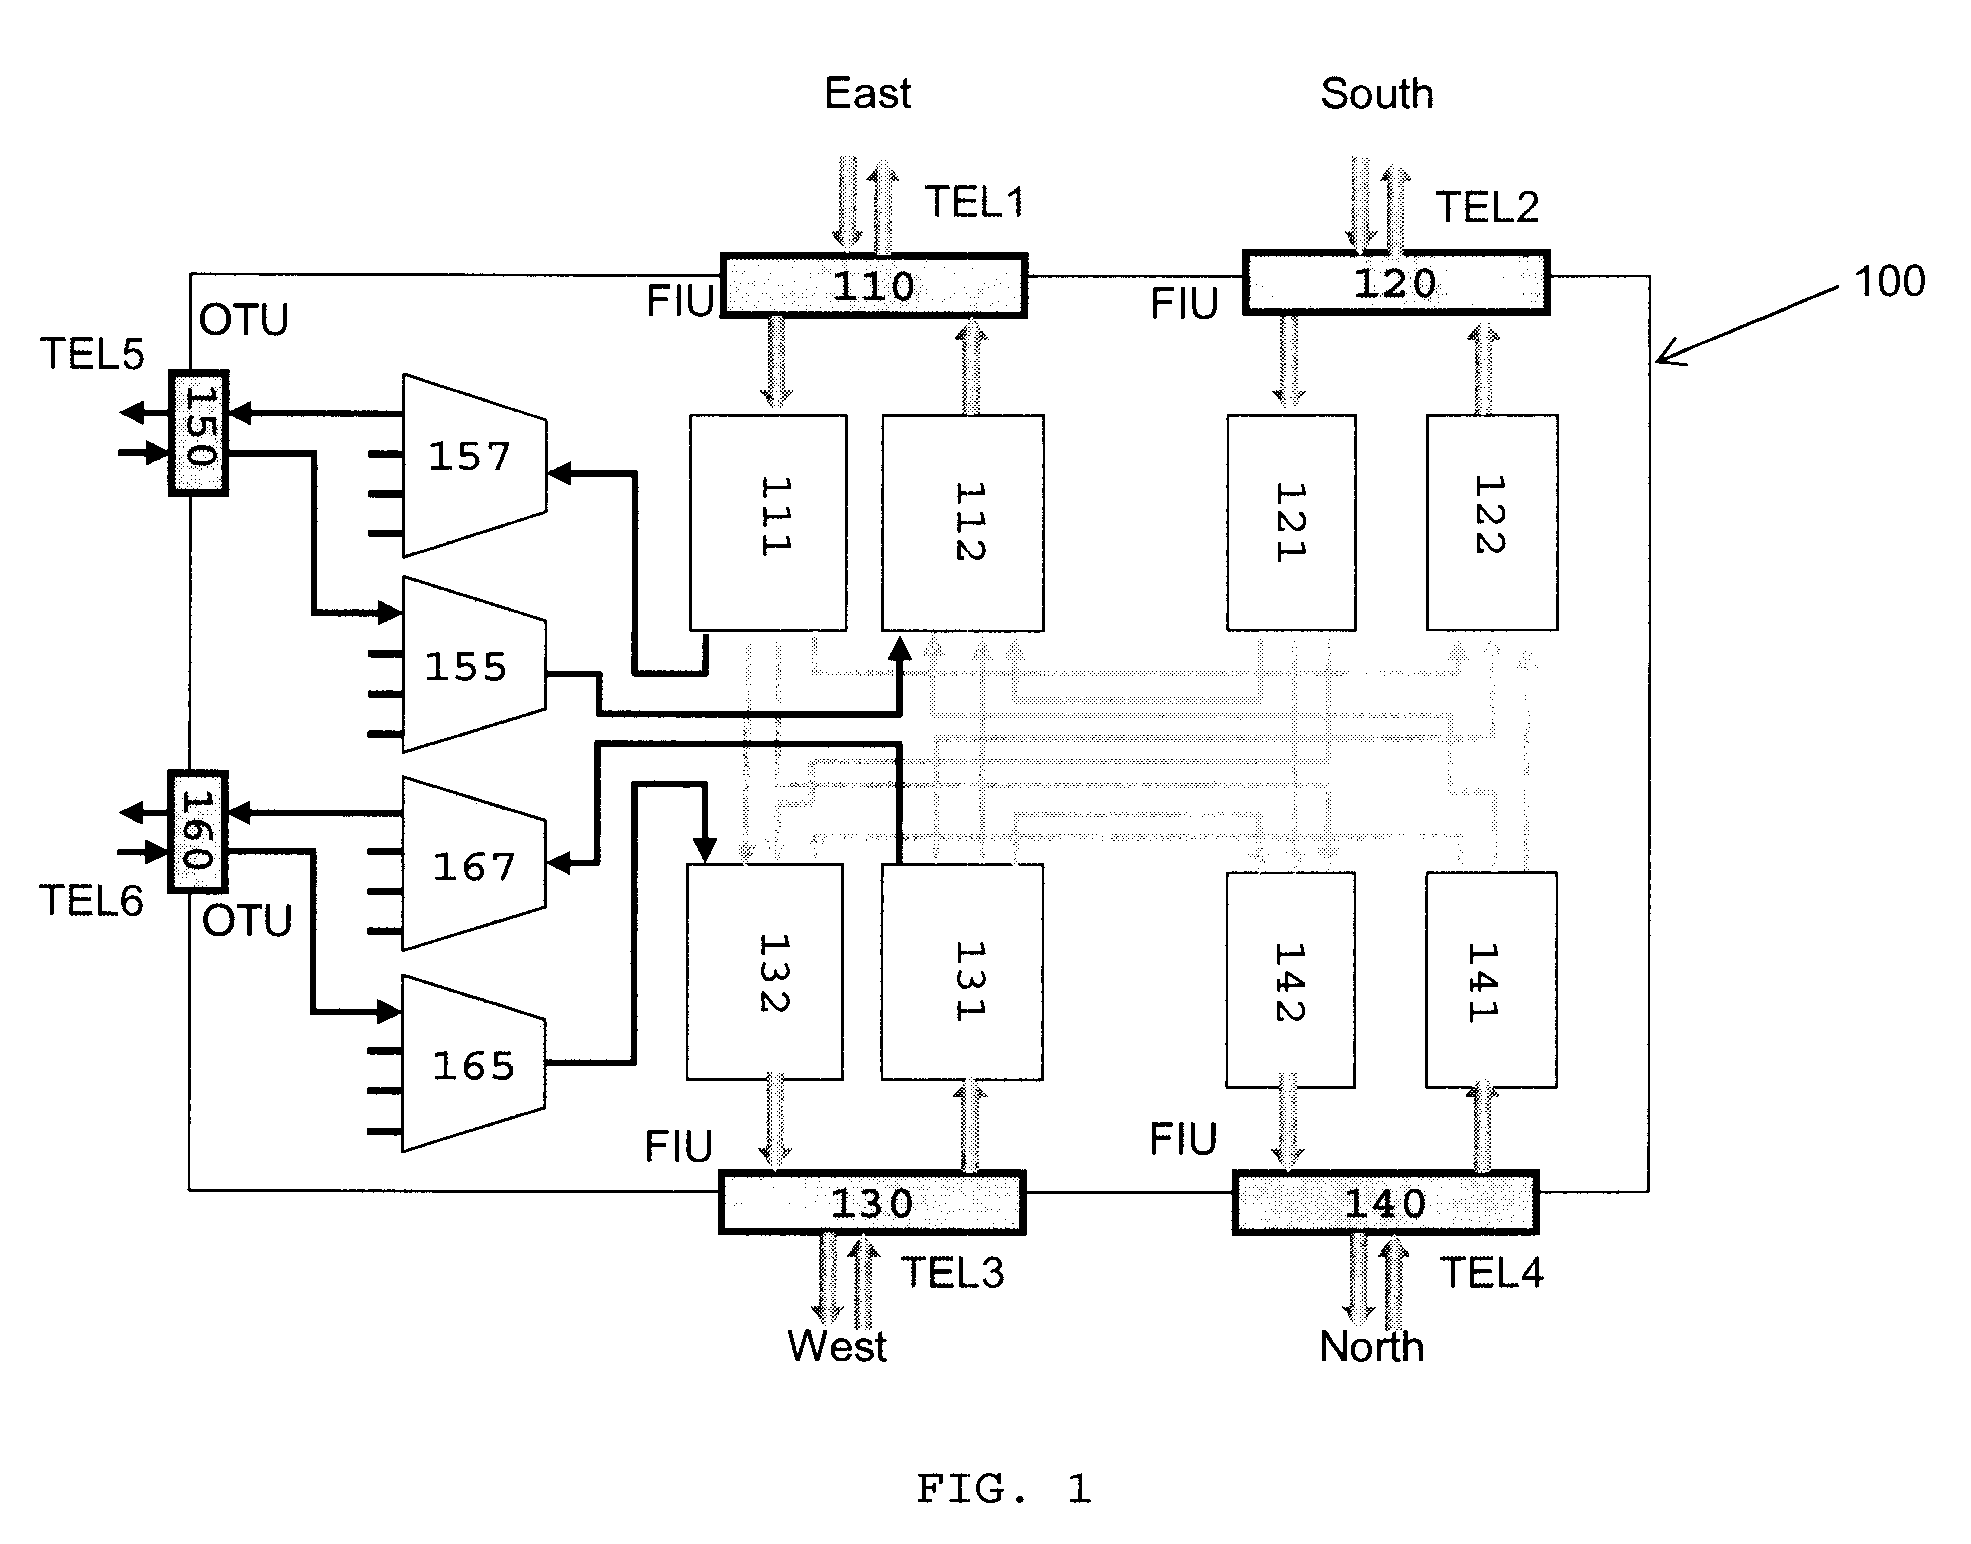 System for utilizing wavelength reachability and wavelength occupation status information to describe cross-connection capabilities in optical networks